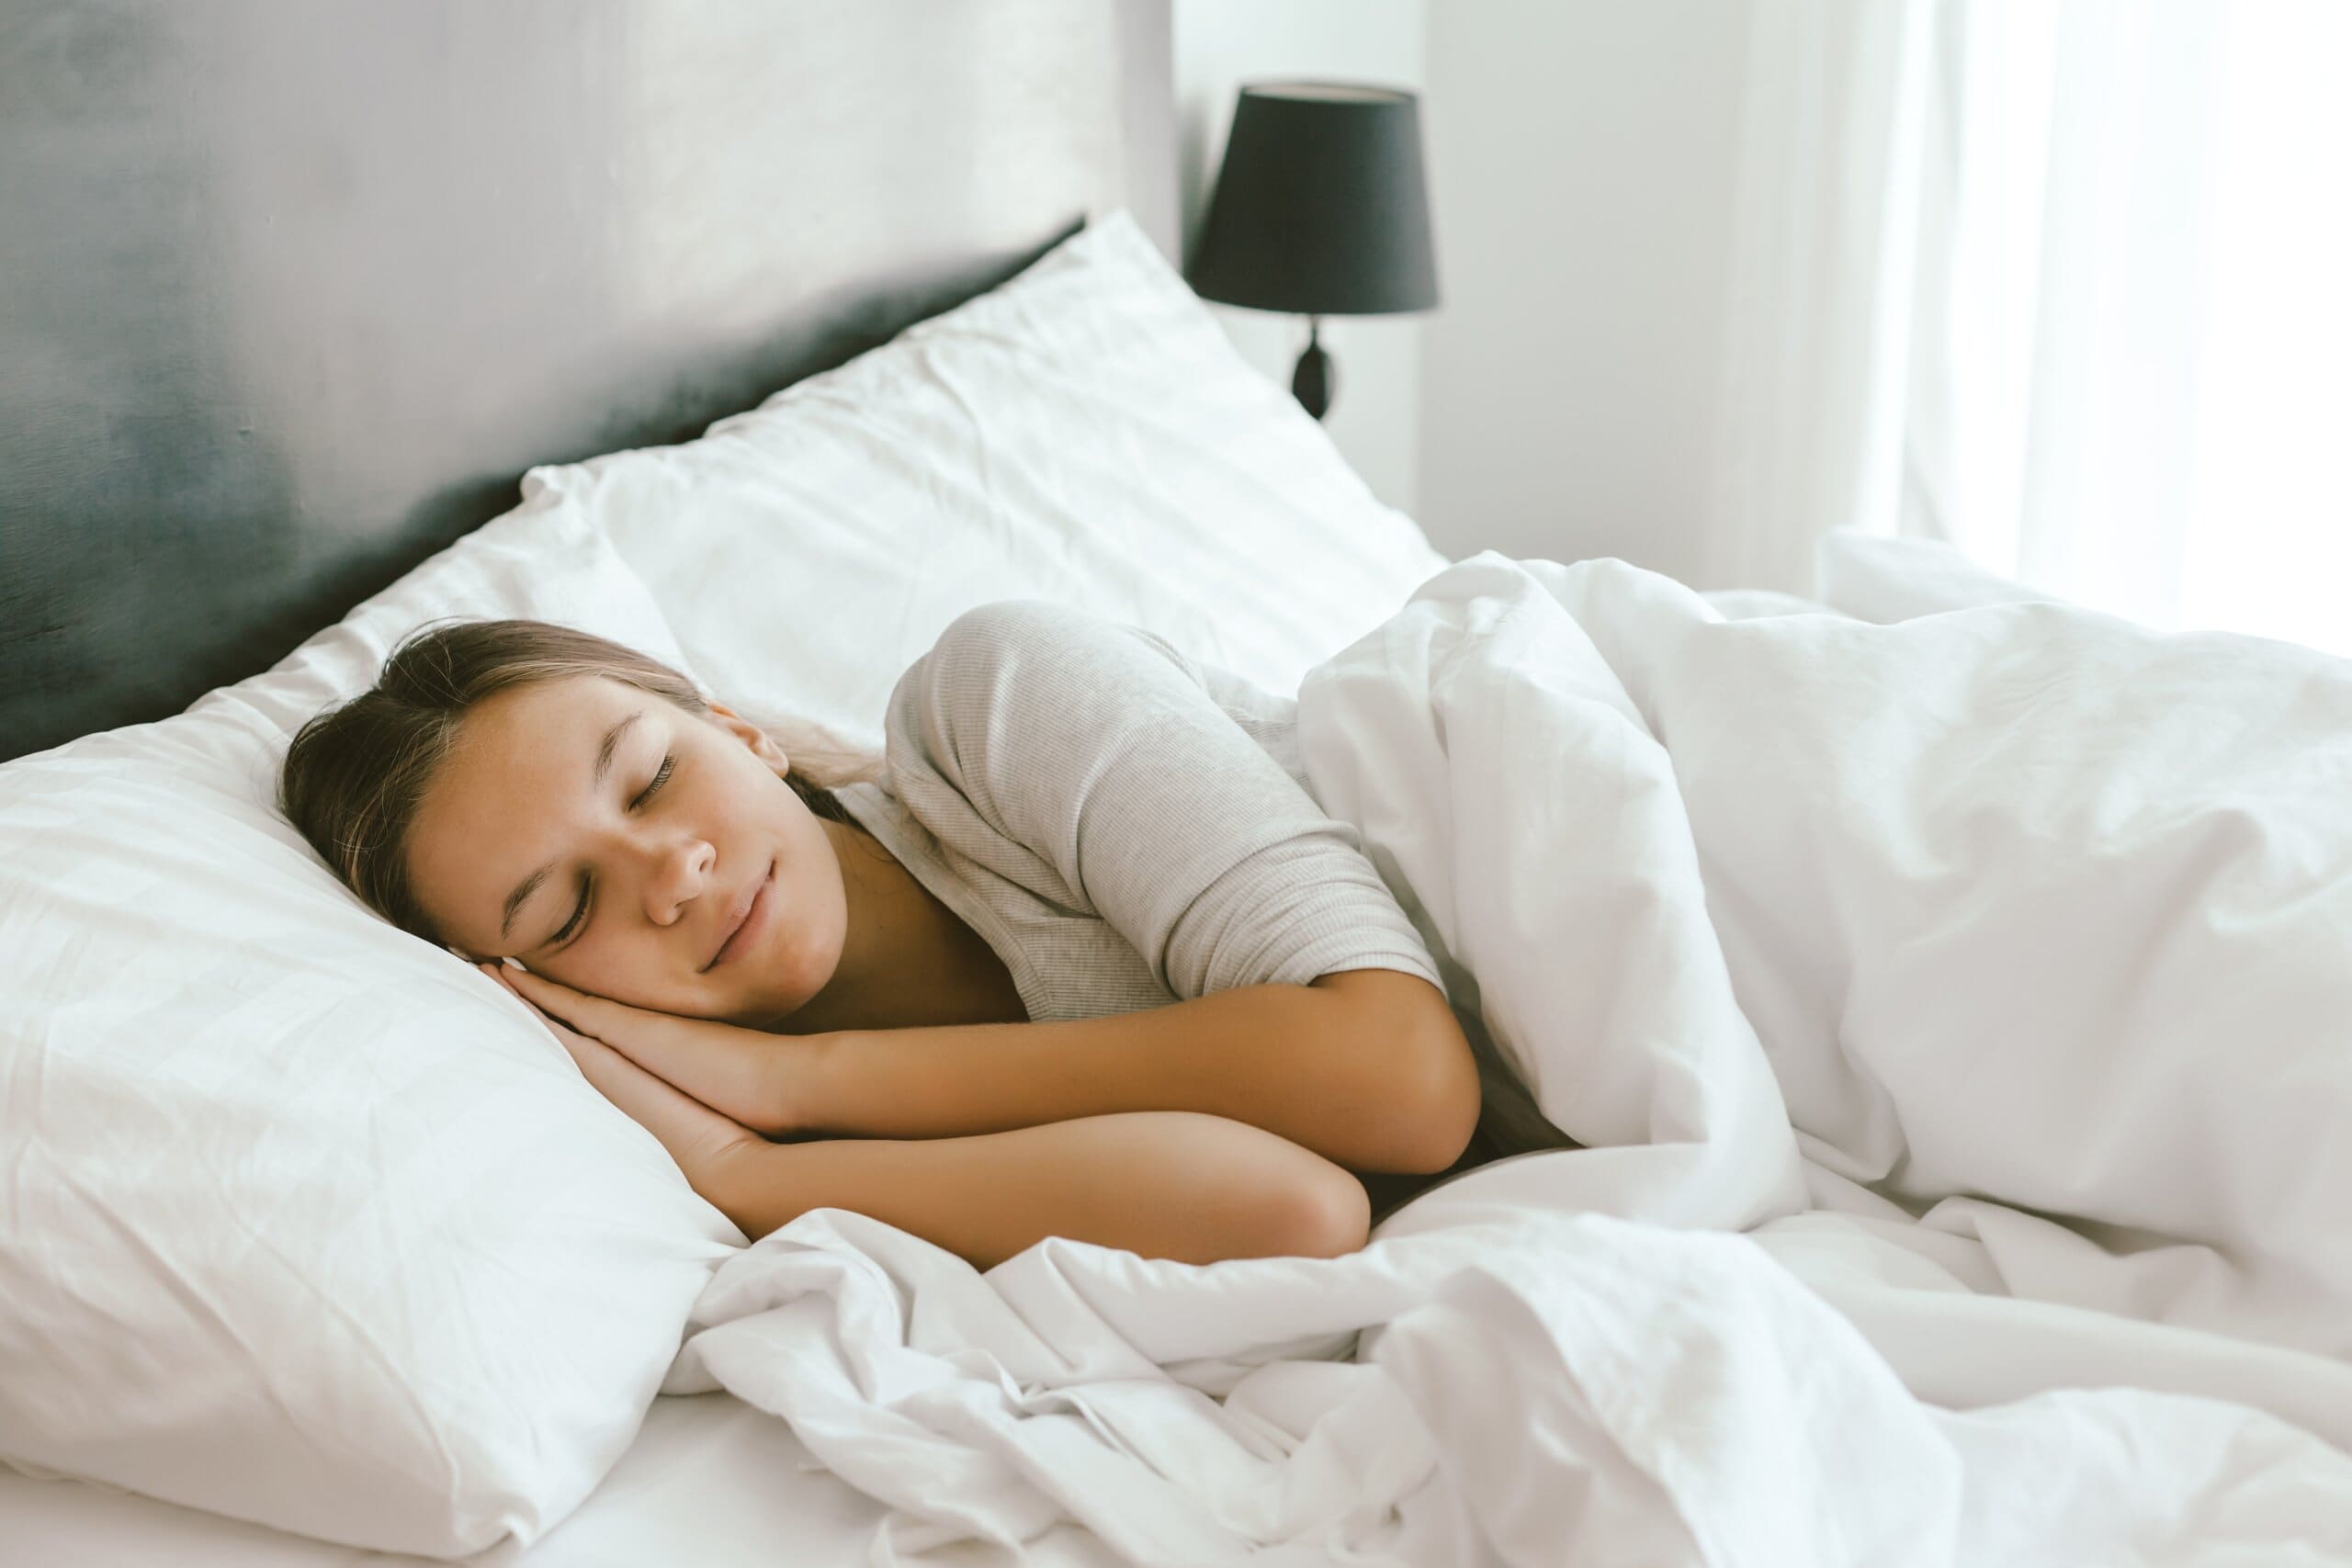 Woman sleeping peacefully in comfy bed.